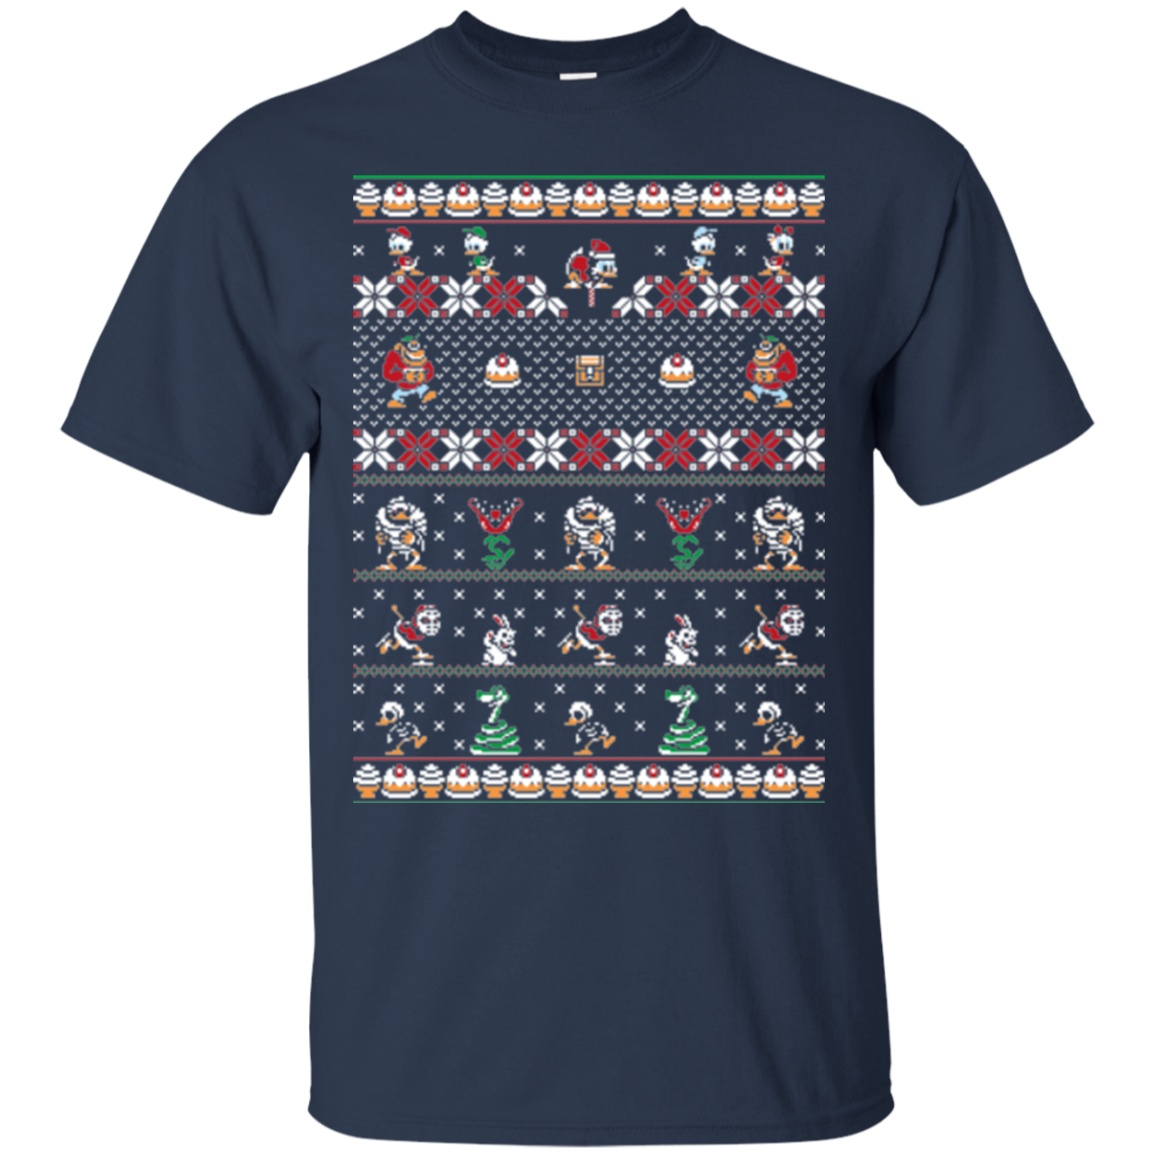 Merry Christmas Uncle Scrooge T-Shirt